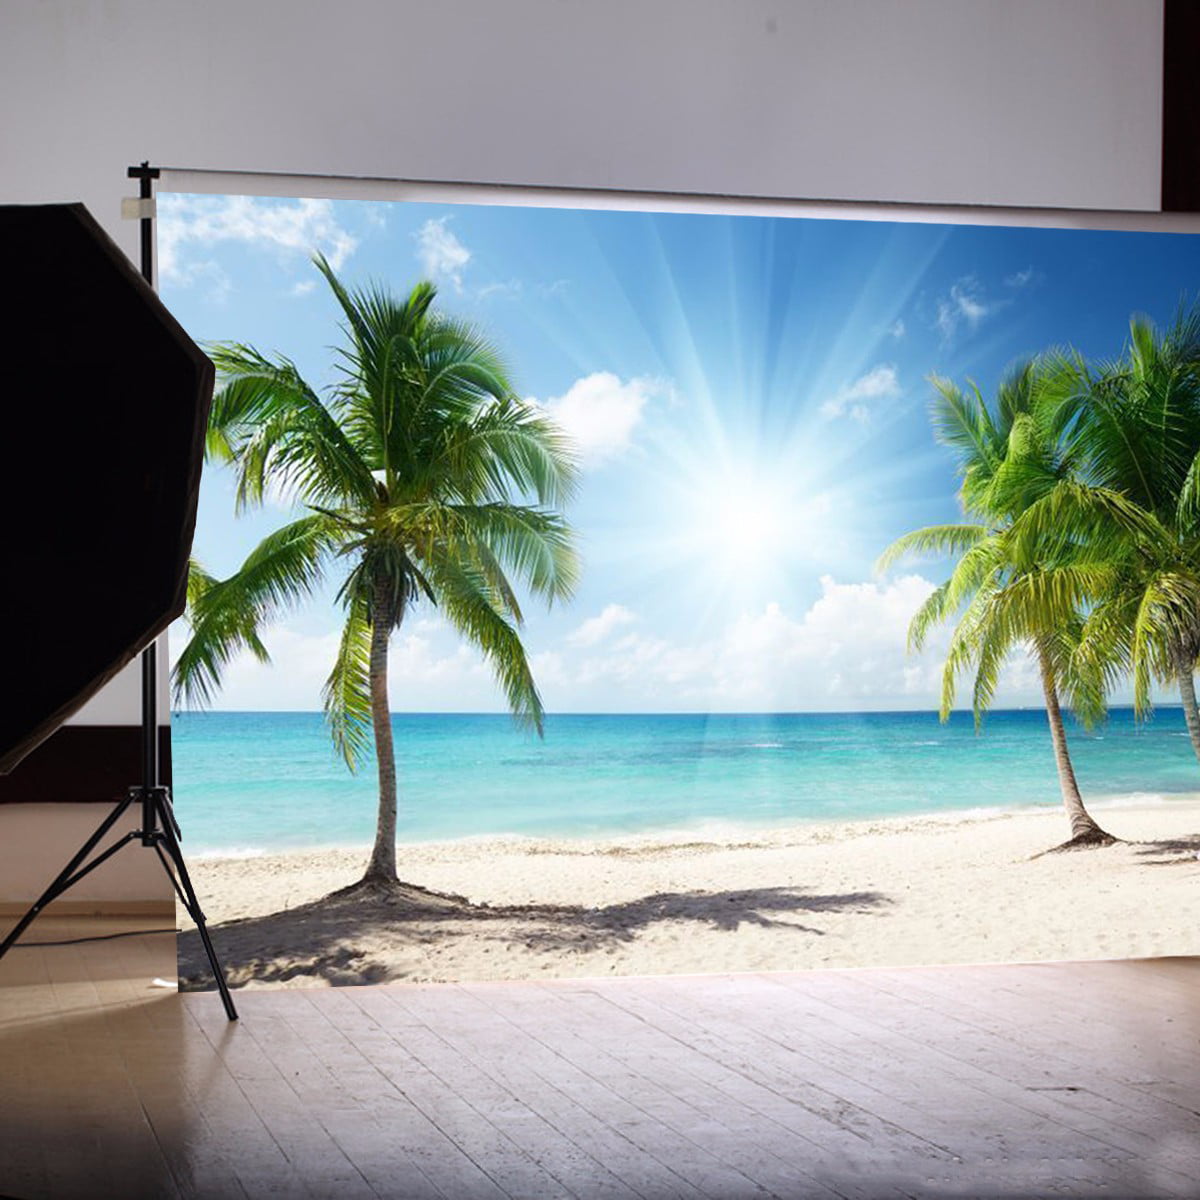 Mehofond Tropical Beach Background Photo Studio Props Summer Party Decoration Wall Decor Photography Banner Vinyl Backdrop 7x5ft